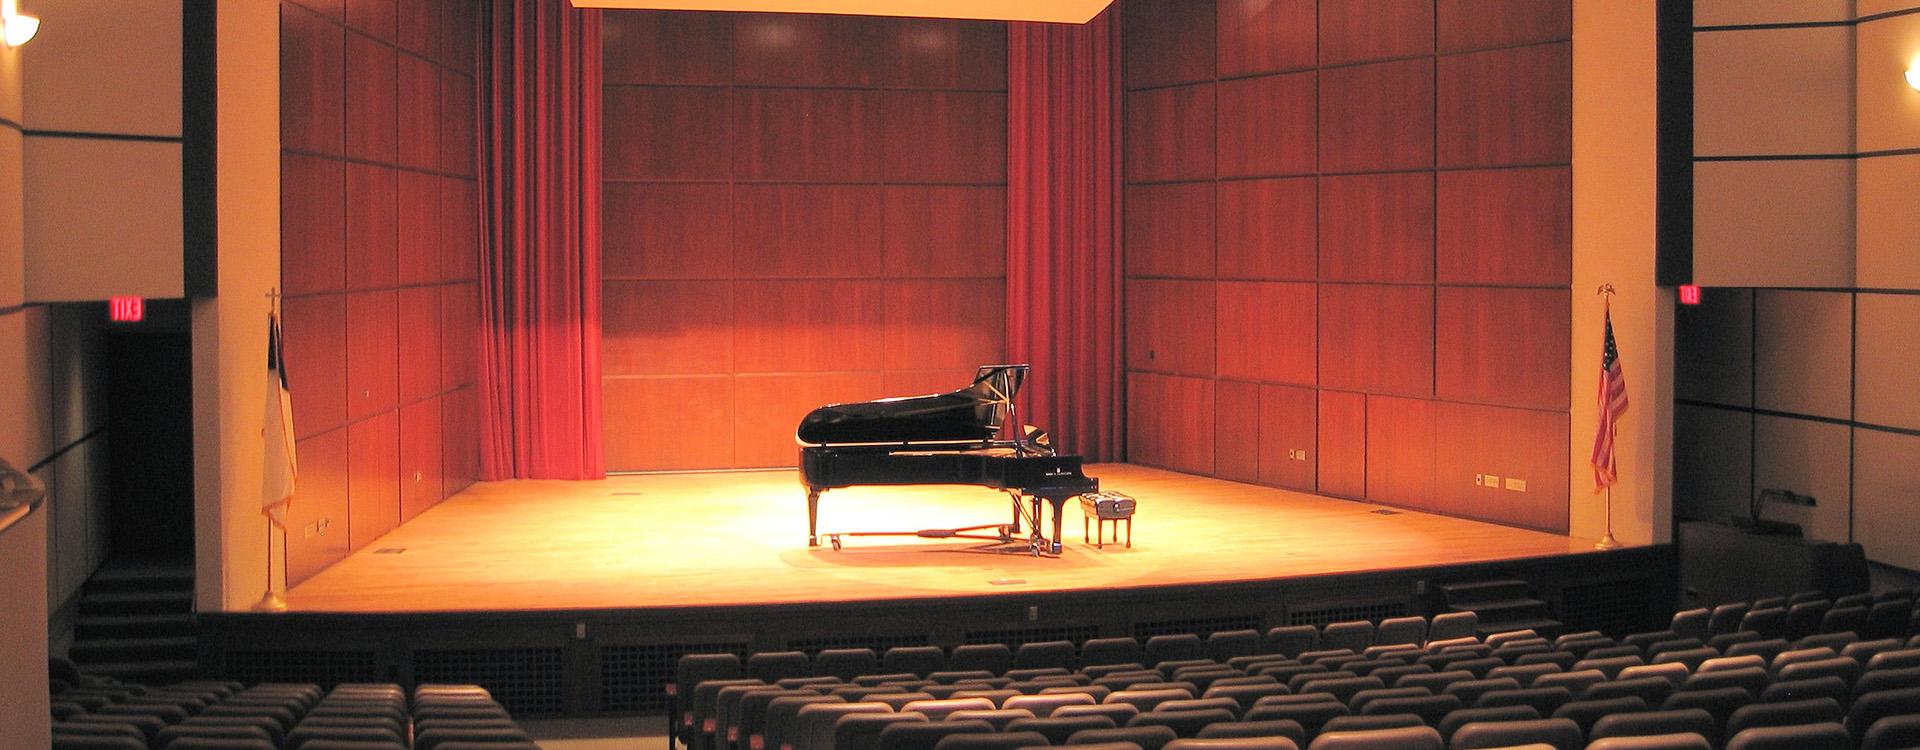 Schwan Concert Hall stage with piano